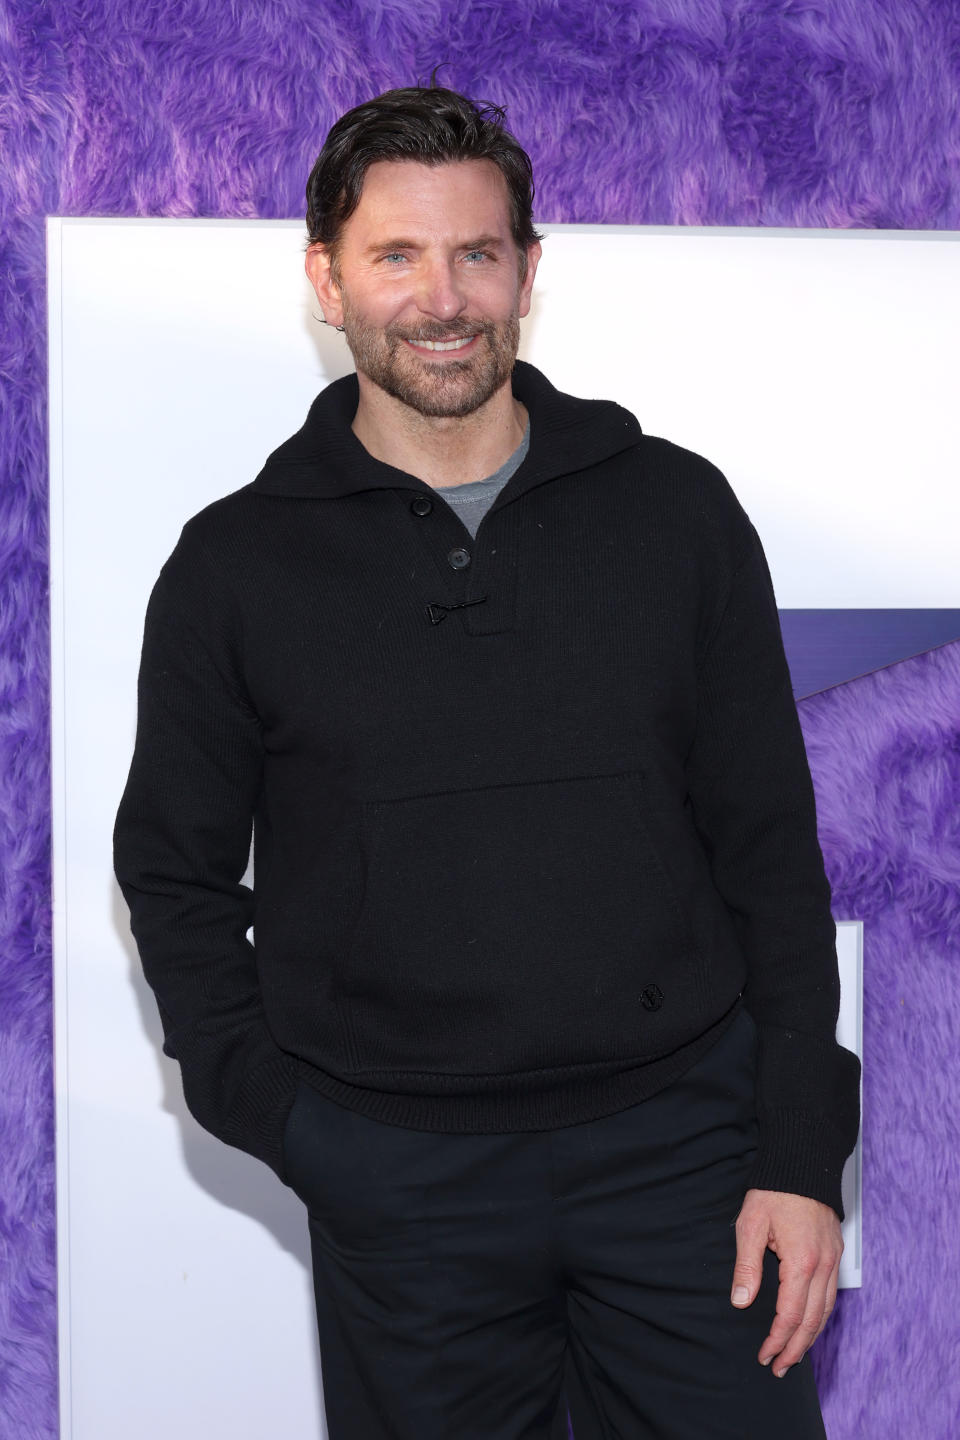 Bradley Cooper attends Paramount's "If" New York premiere at SVA Theater